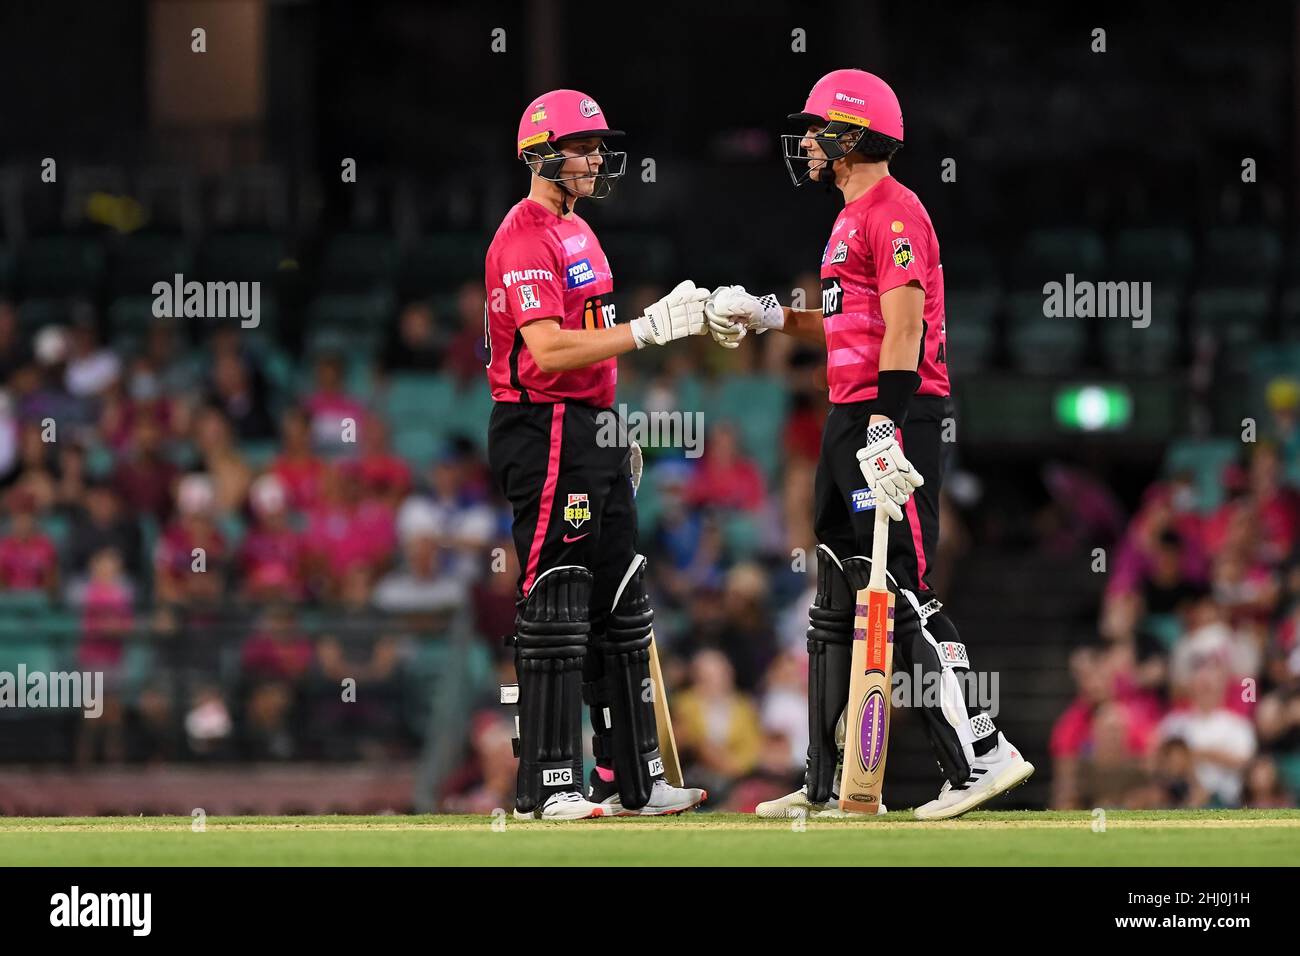 Sydney, Australia, 26 January, 2022. Hayden Kerr of the Sixers and Sean Abbott of the Sixers touch gloves during the Big Bash League Challenger cricket match between Sydney Sixers and Adelaide Strikers at The Sydney Cricket Ground on January 26, 2022 in Sydney, Australia. Credit: Steven Markham/Speed Media/Alamy Live News Stock Photo